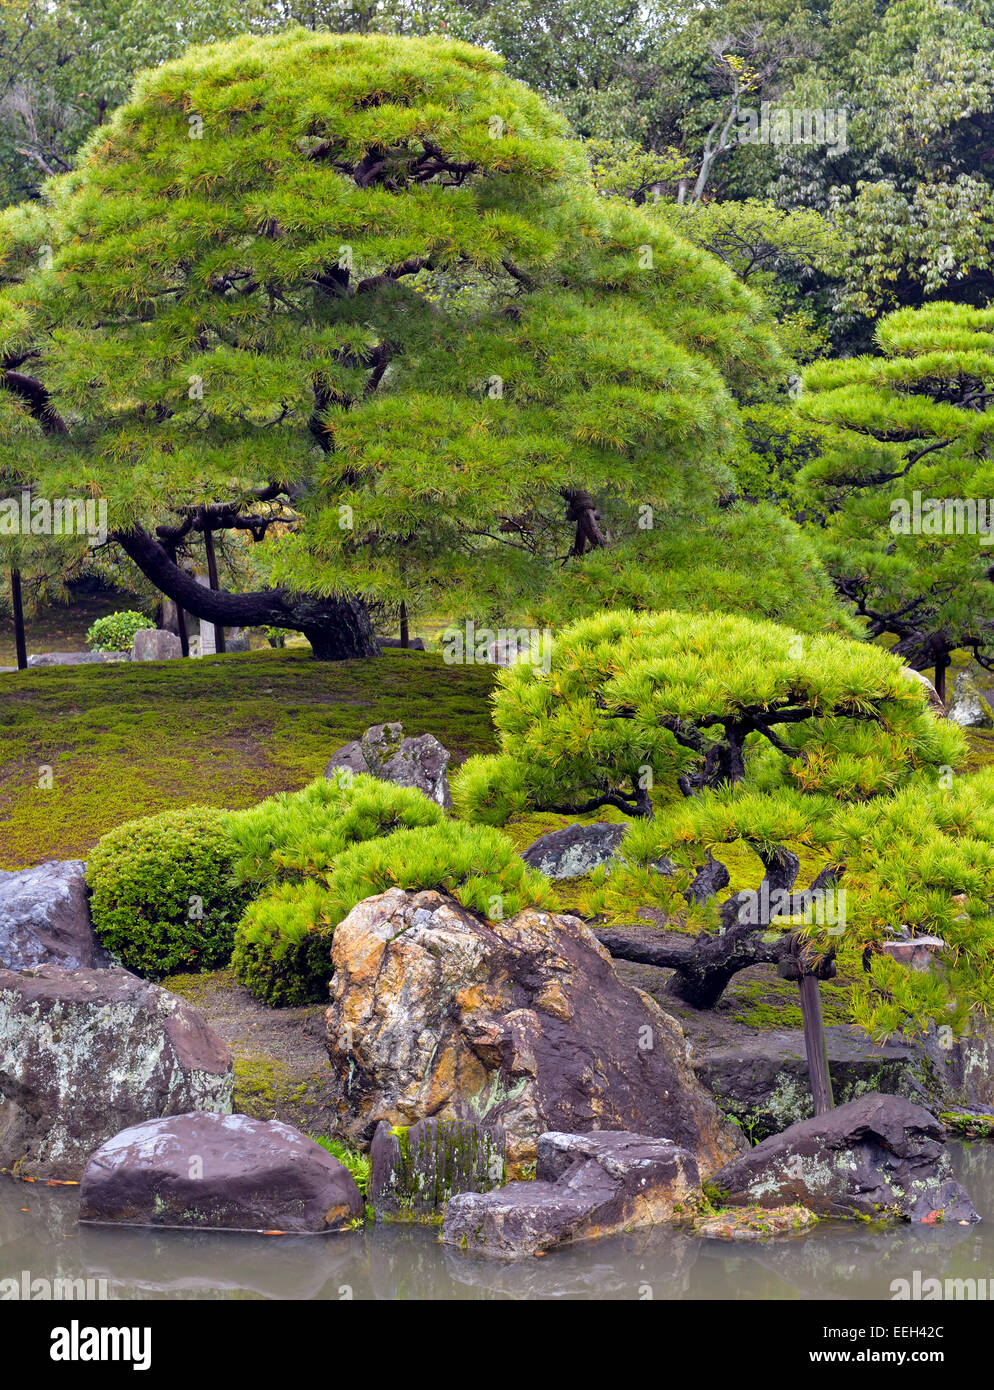 Manicured pines in Japanese garden, Kyoto, Japan Stock Photo